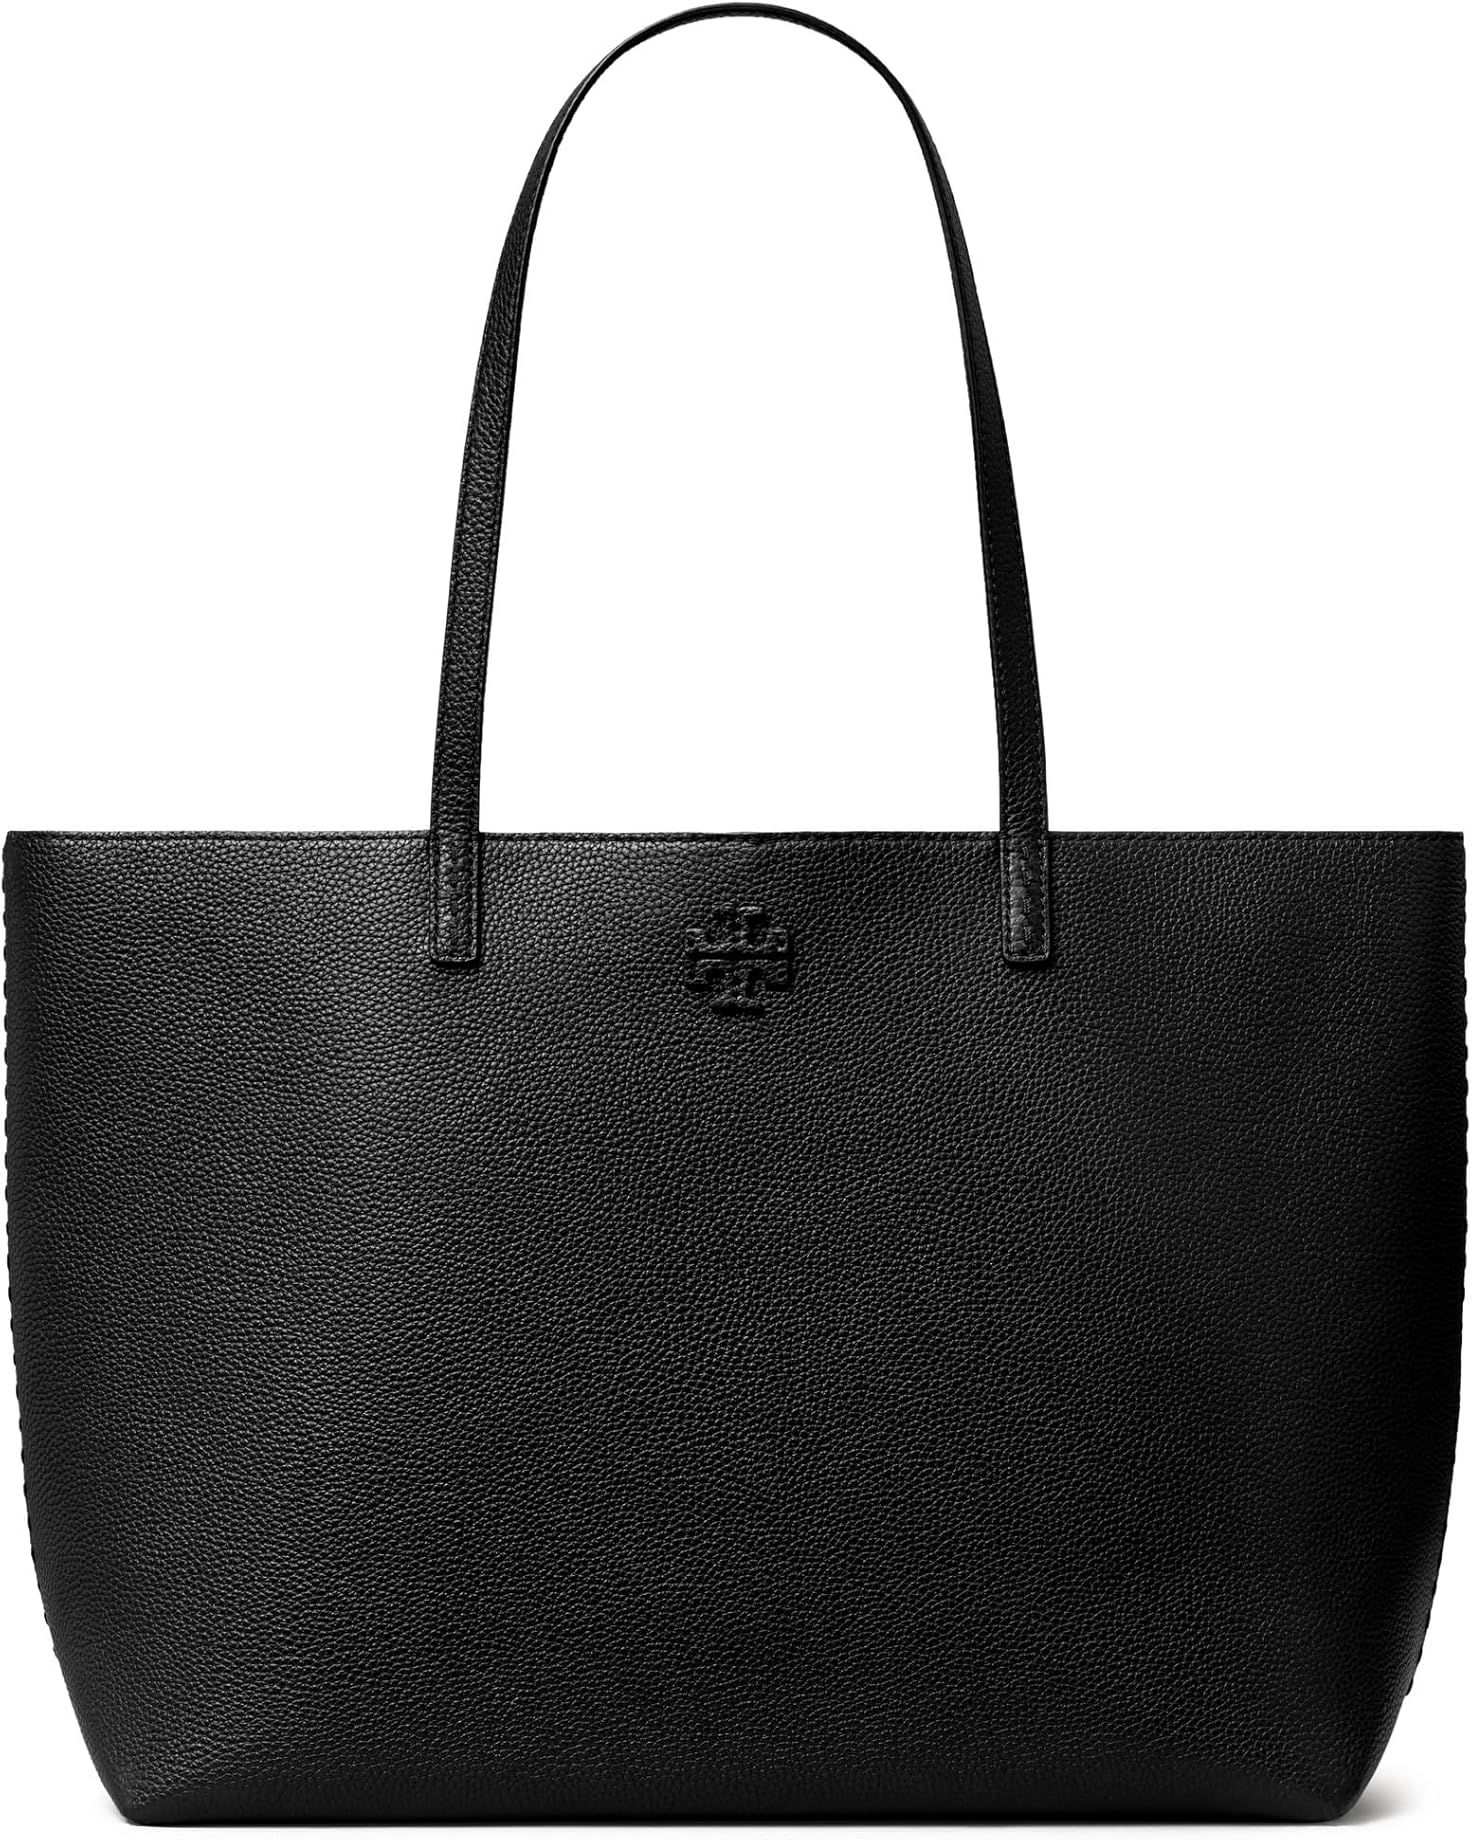 Tory Burch McGraw Tote | Zappos